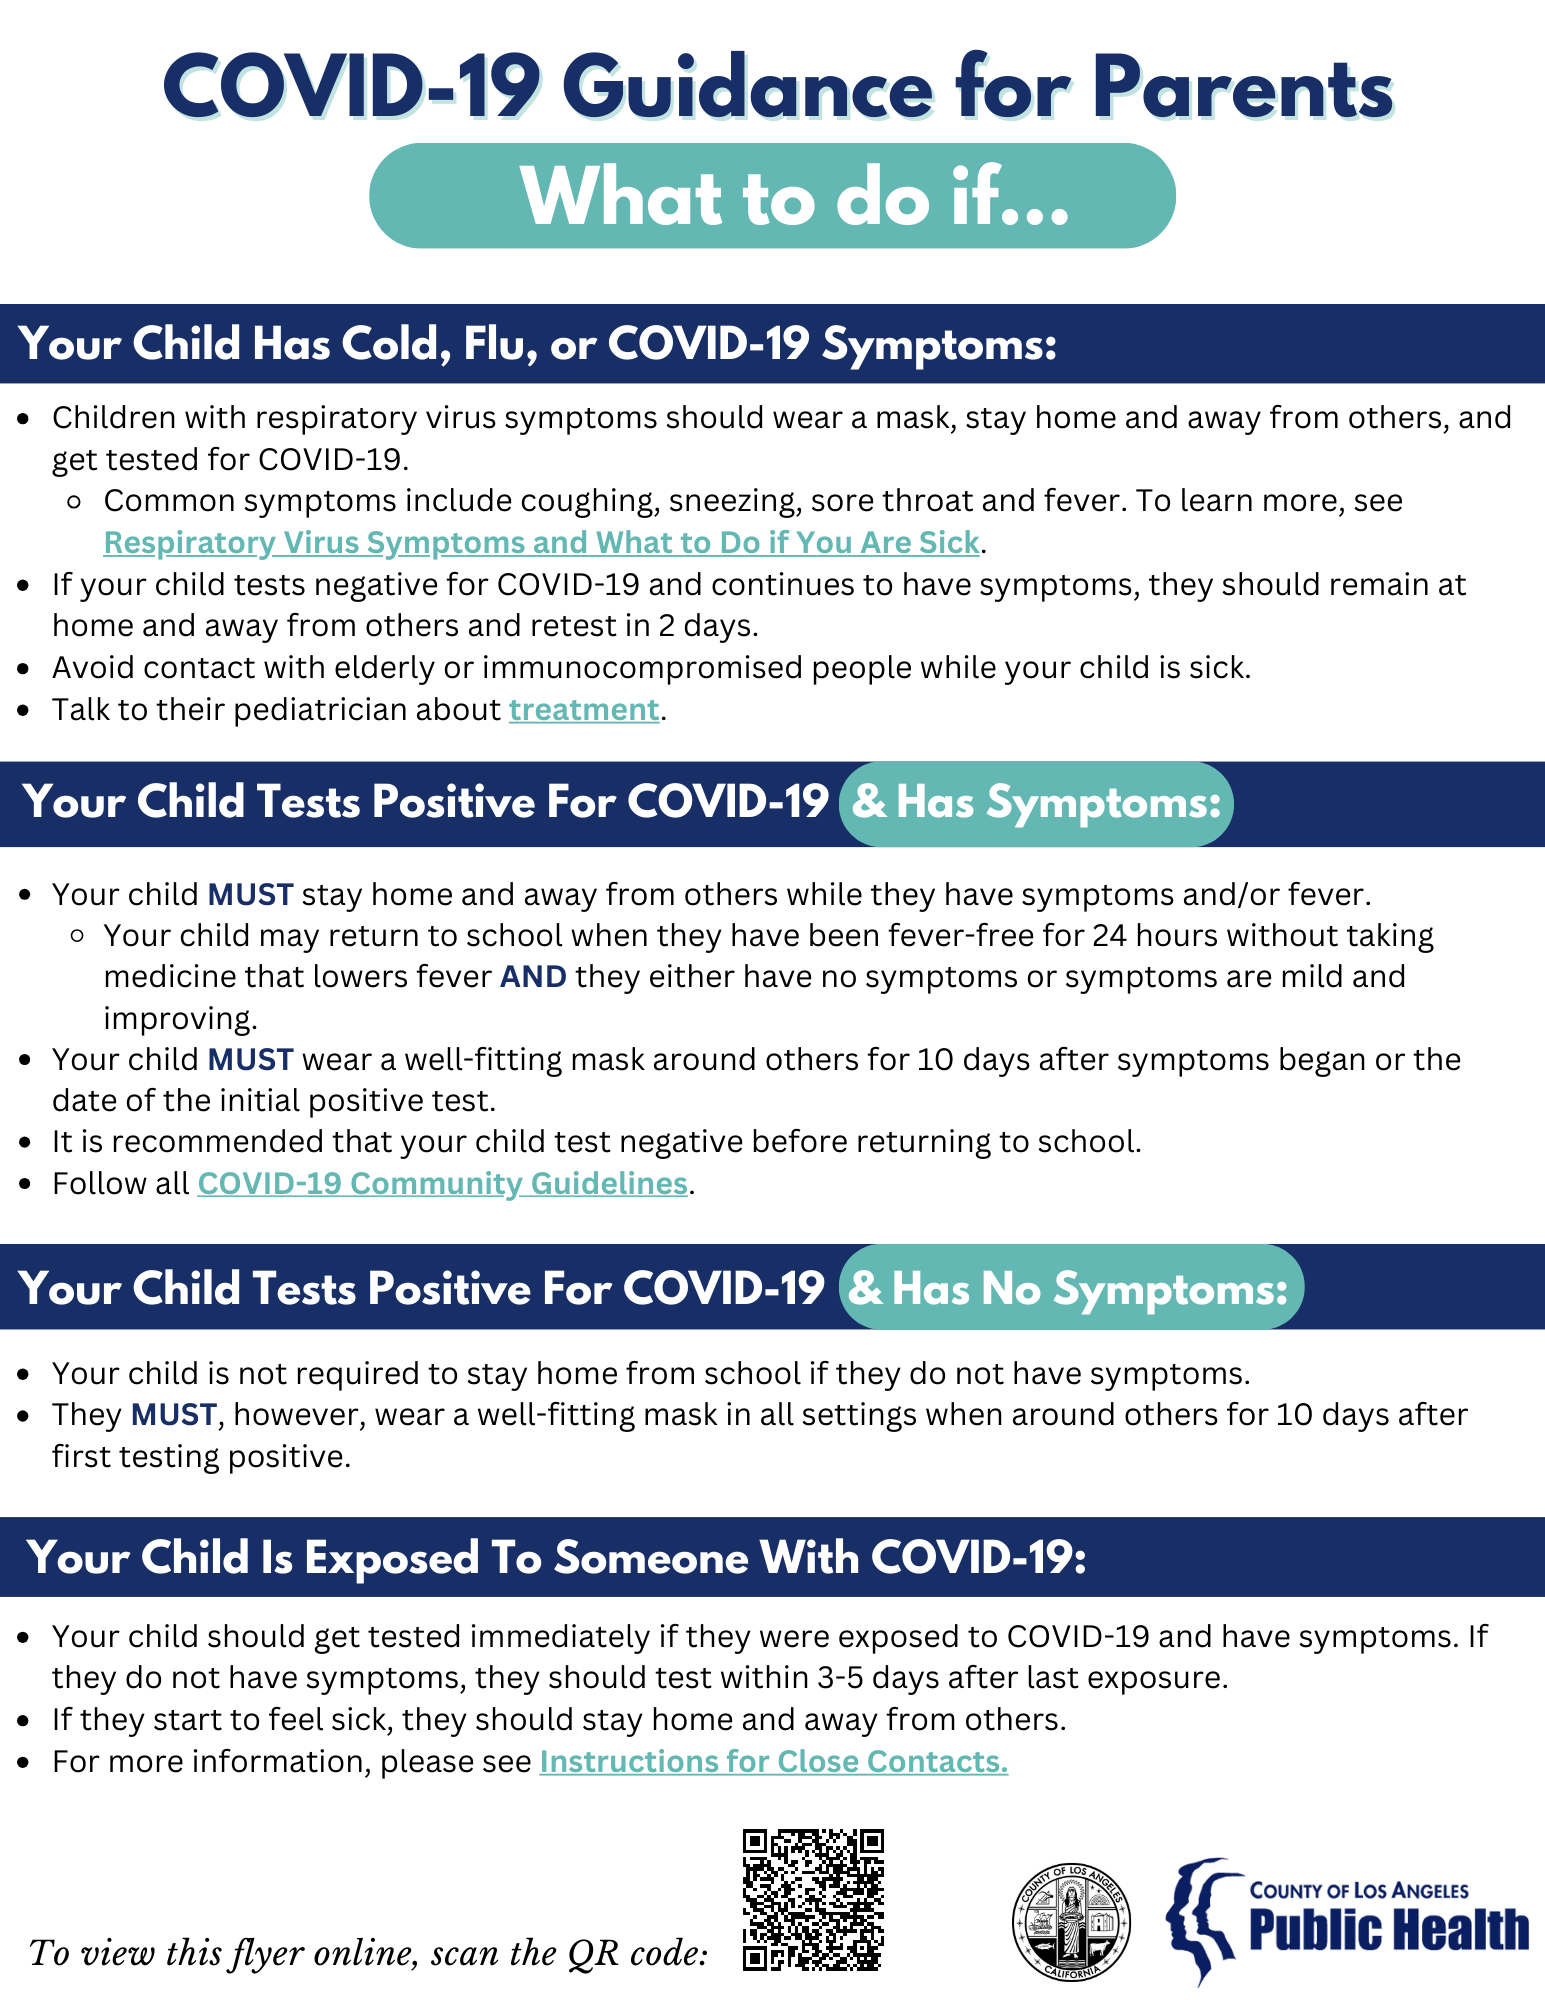 COVID-19 Quick Guide for Parents